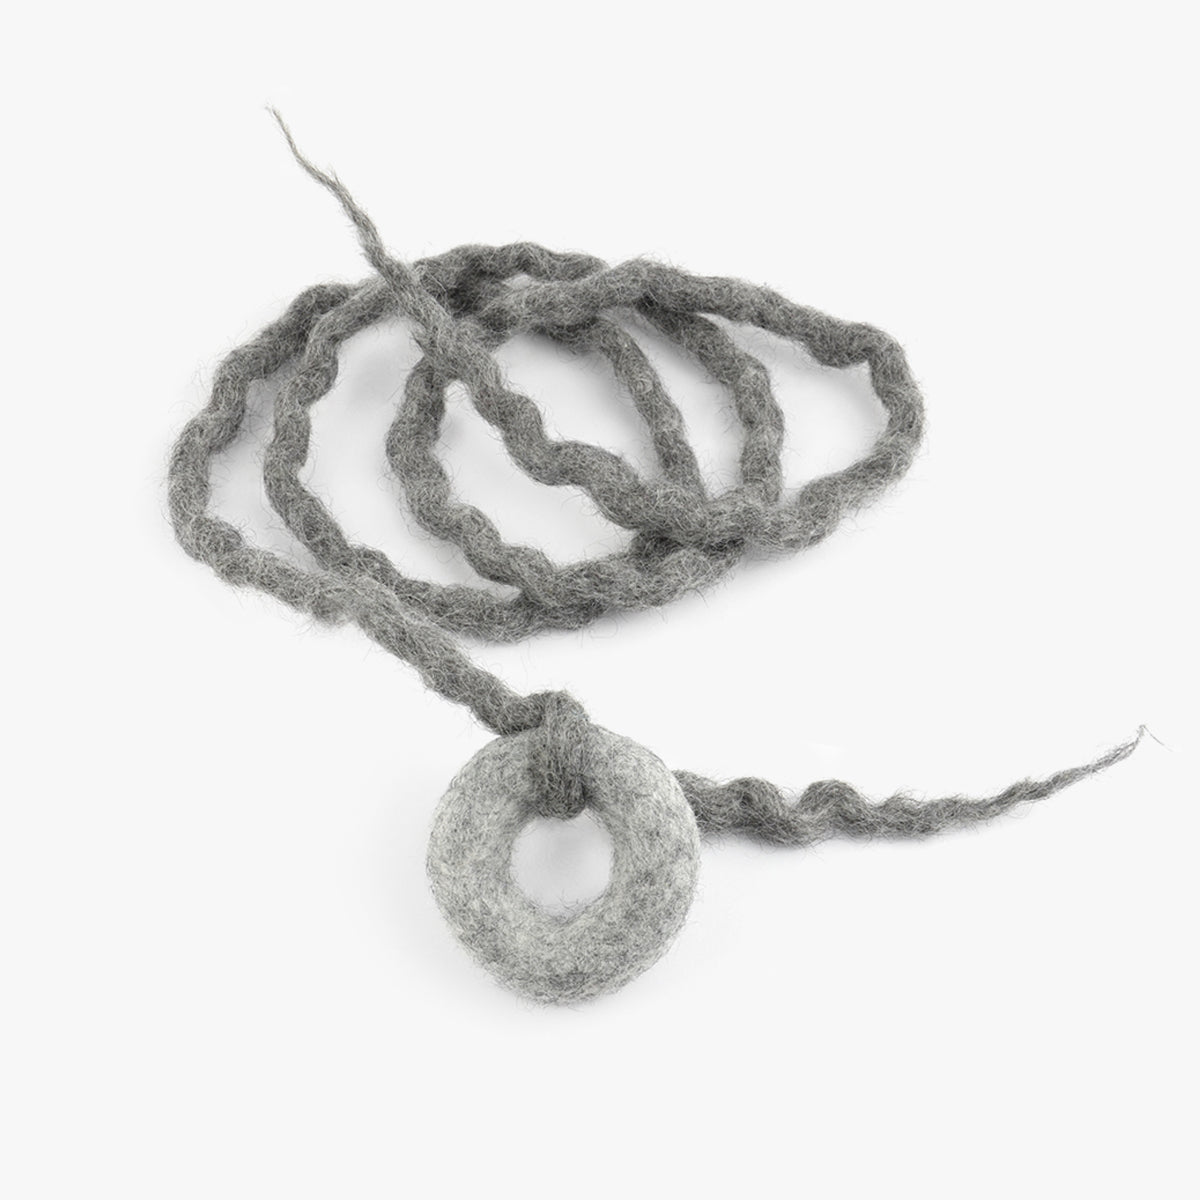 Stylecats Catch Me Charmer, Grey Felt Snake Cat Toy, With Ring | at Made Moggie